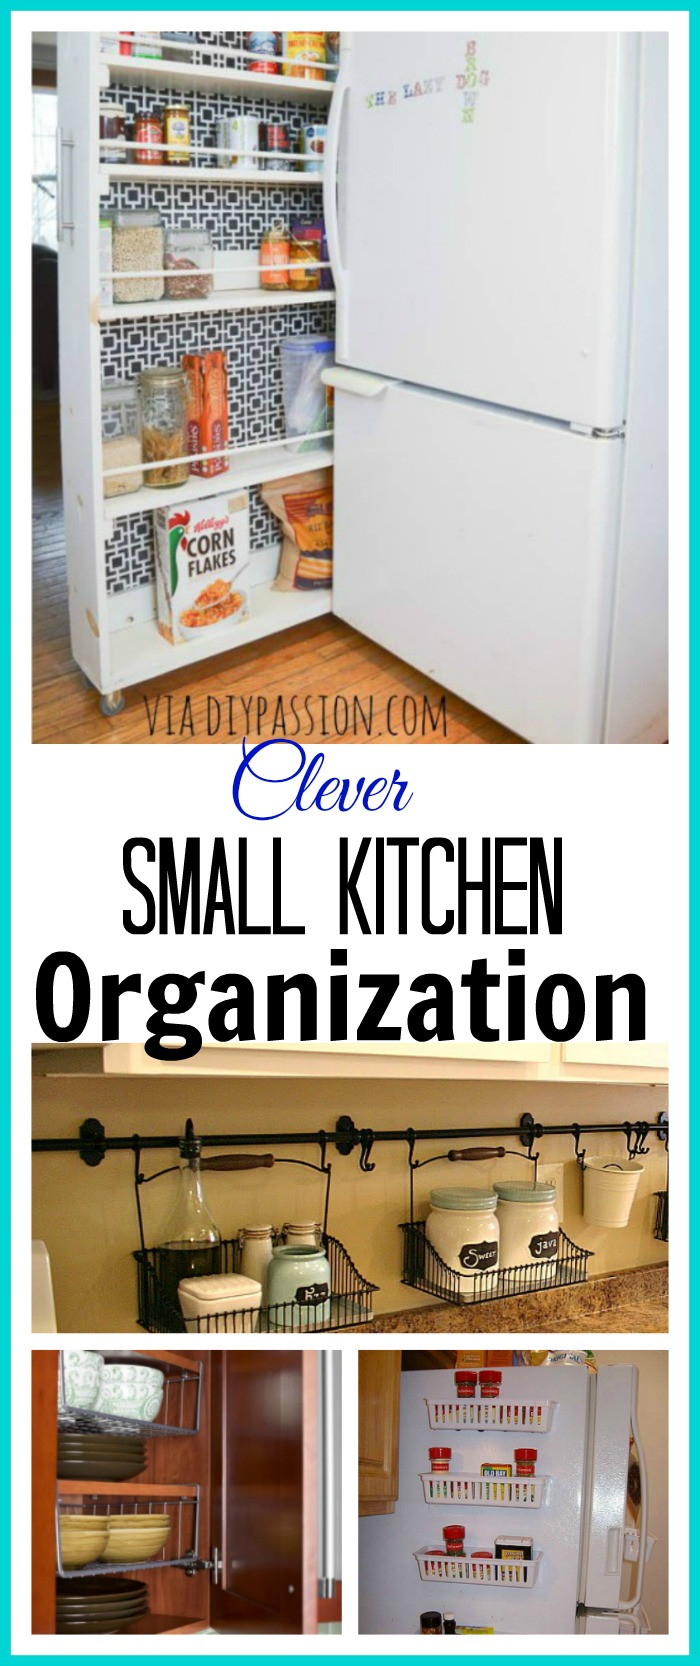 Small Kitchen Organization
 10 Ideas For Organizing a Small Kitchen A Cultivated Nest